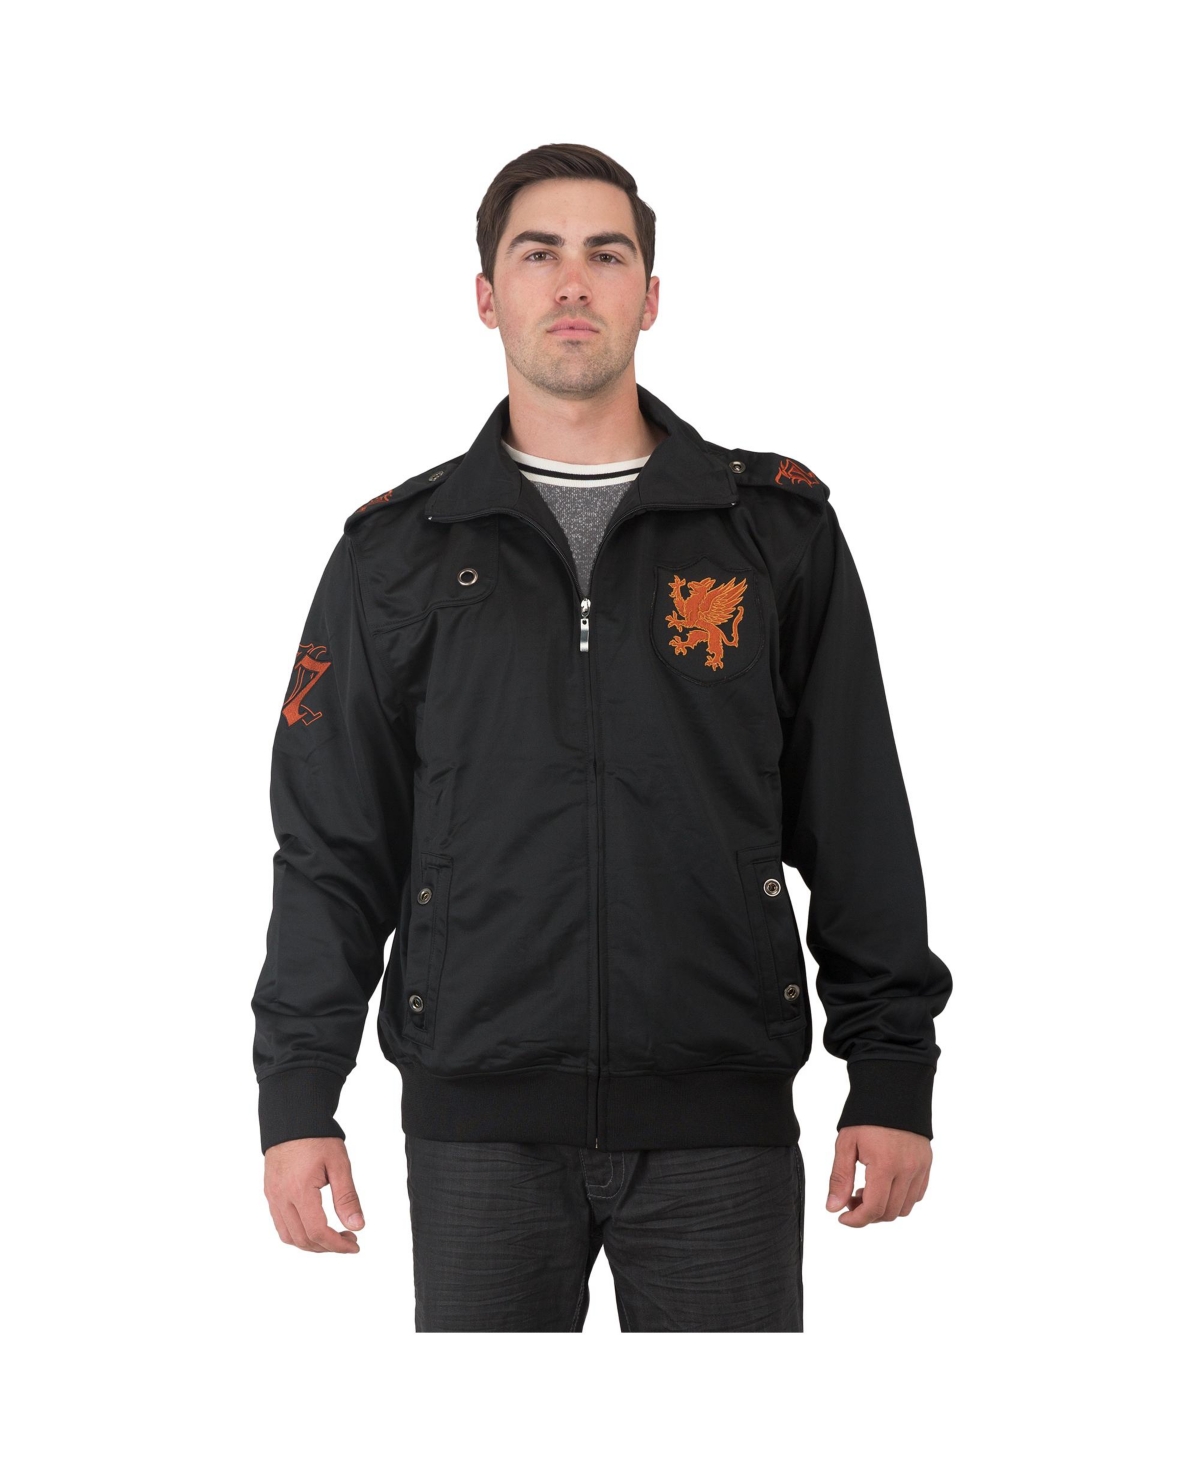 Men's Regular Embroidery Patches Performance Track Jacket - Black